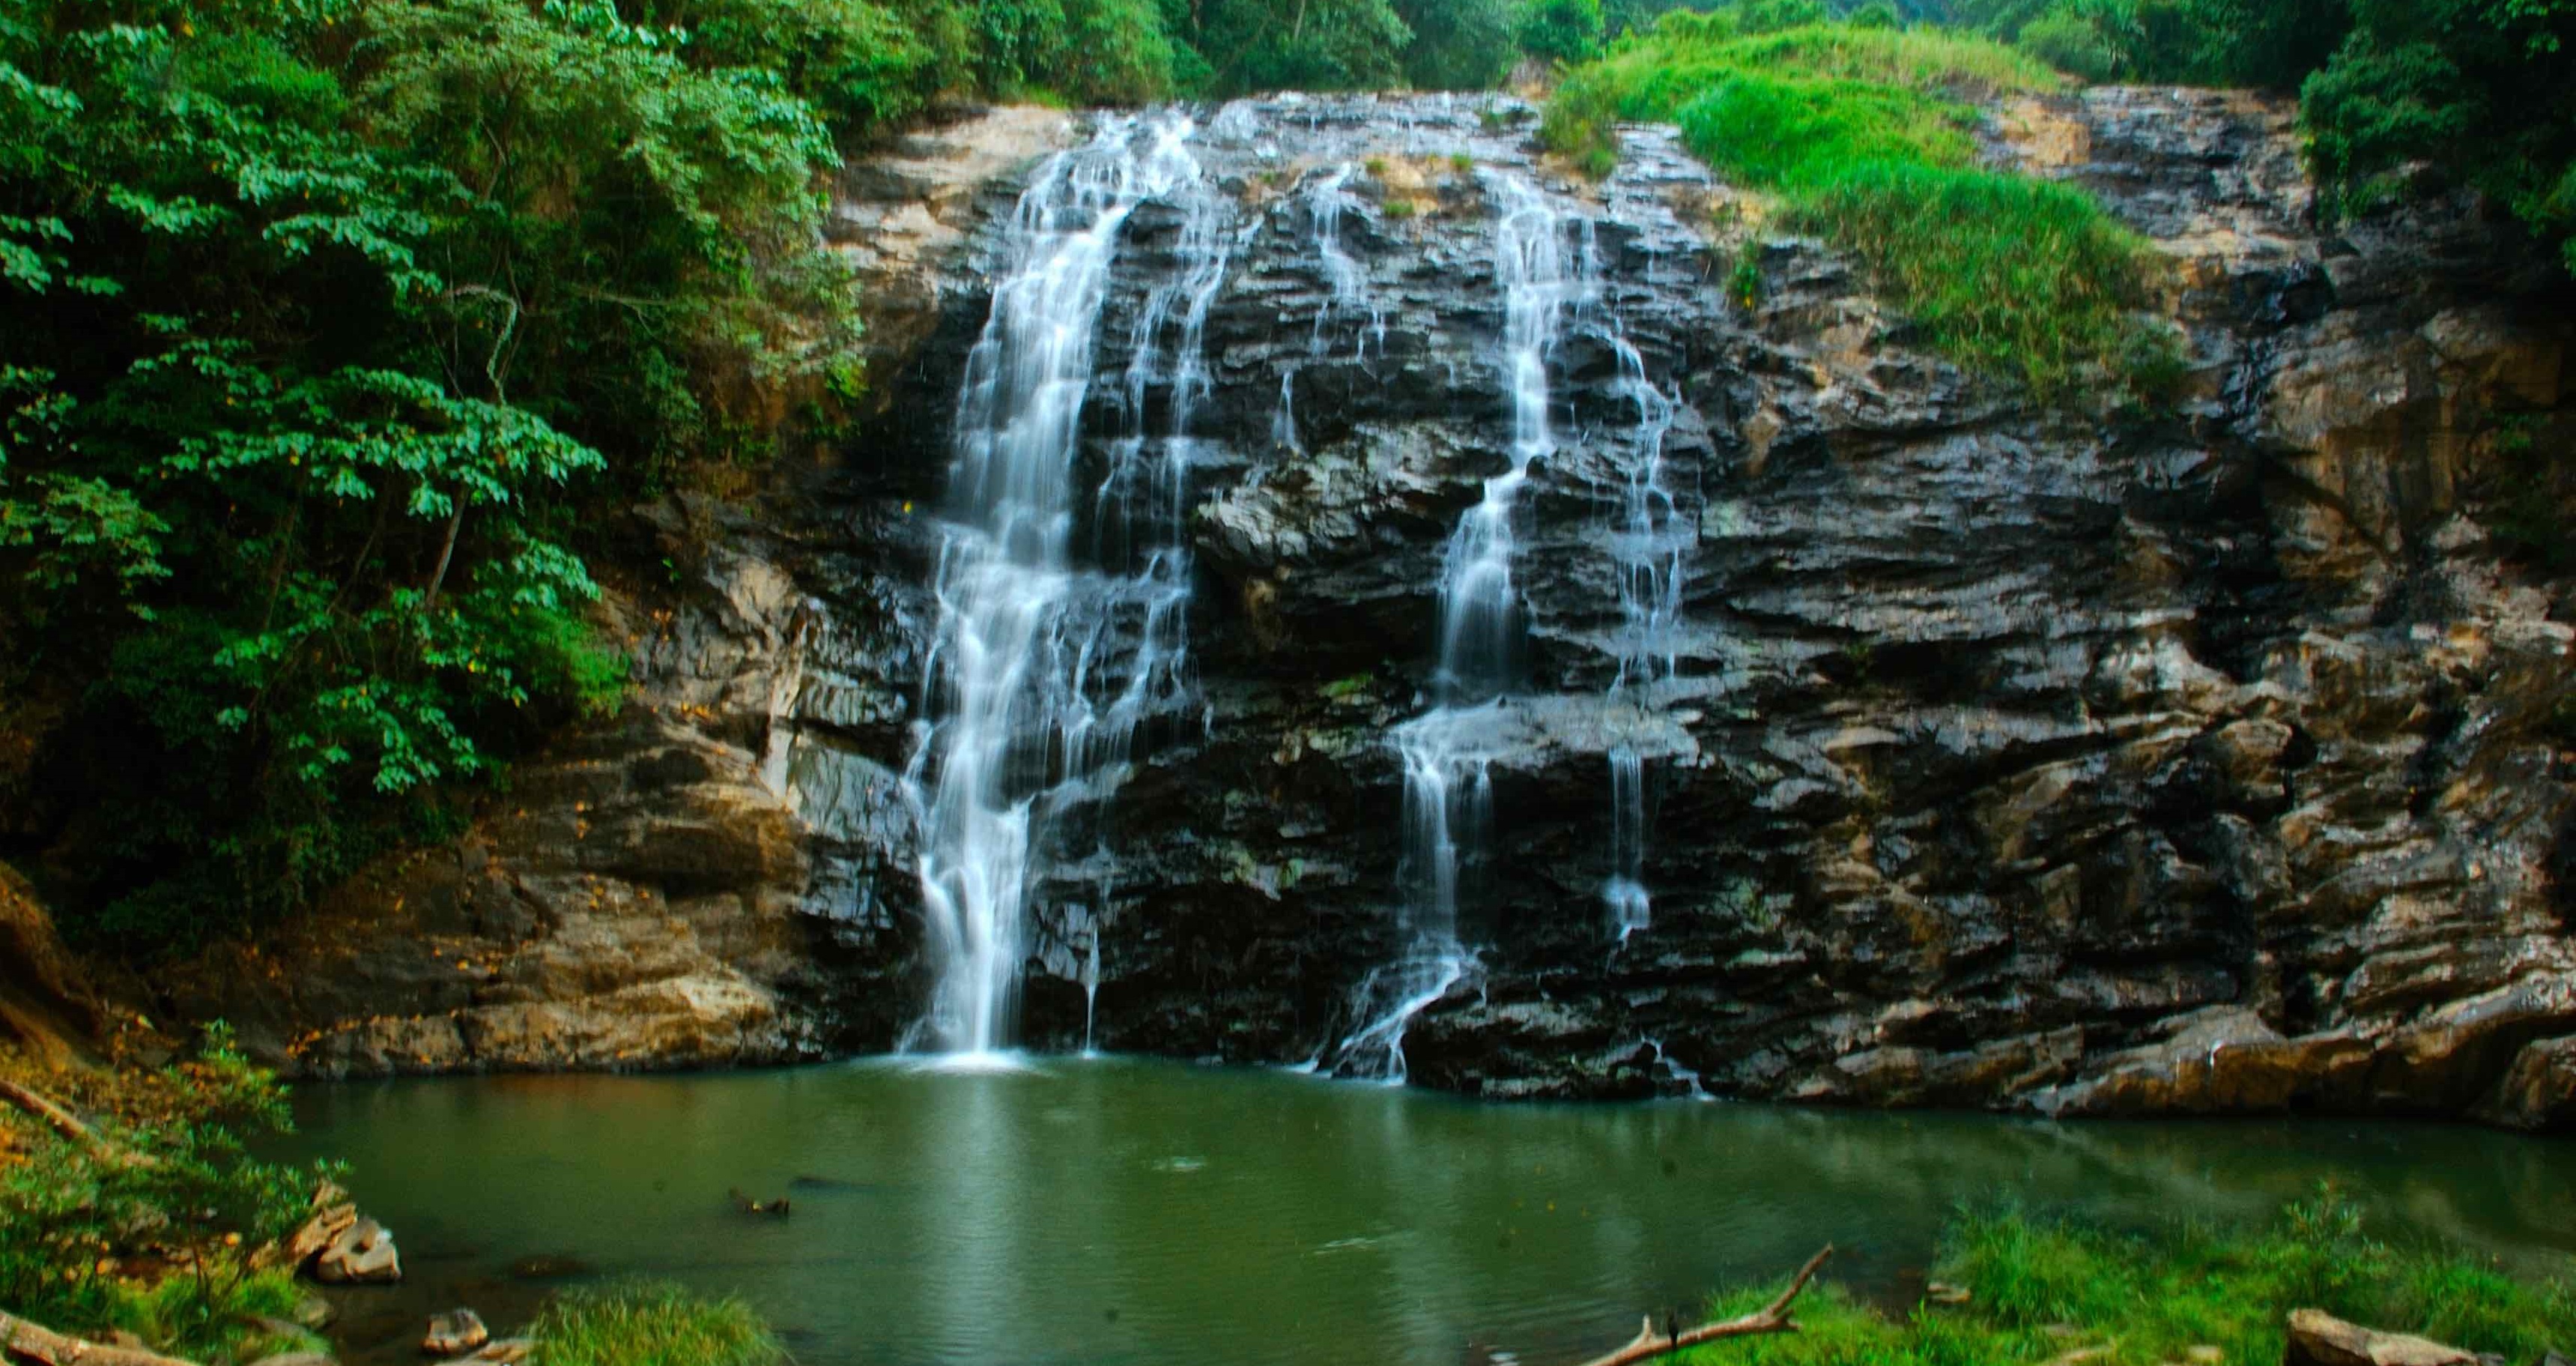  Coorg – Nature gifted